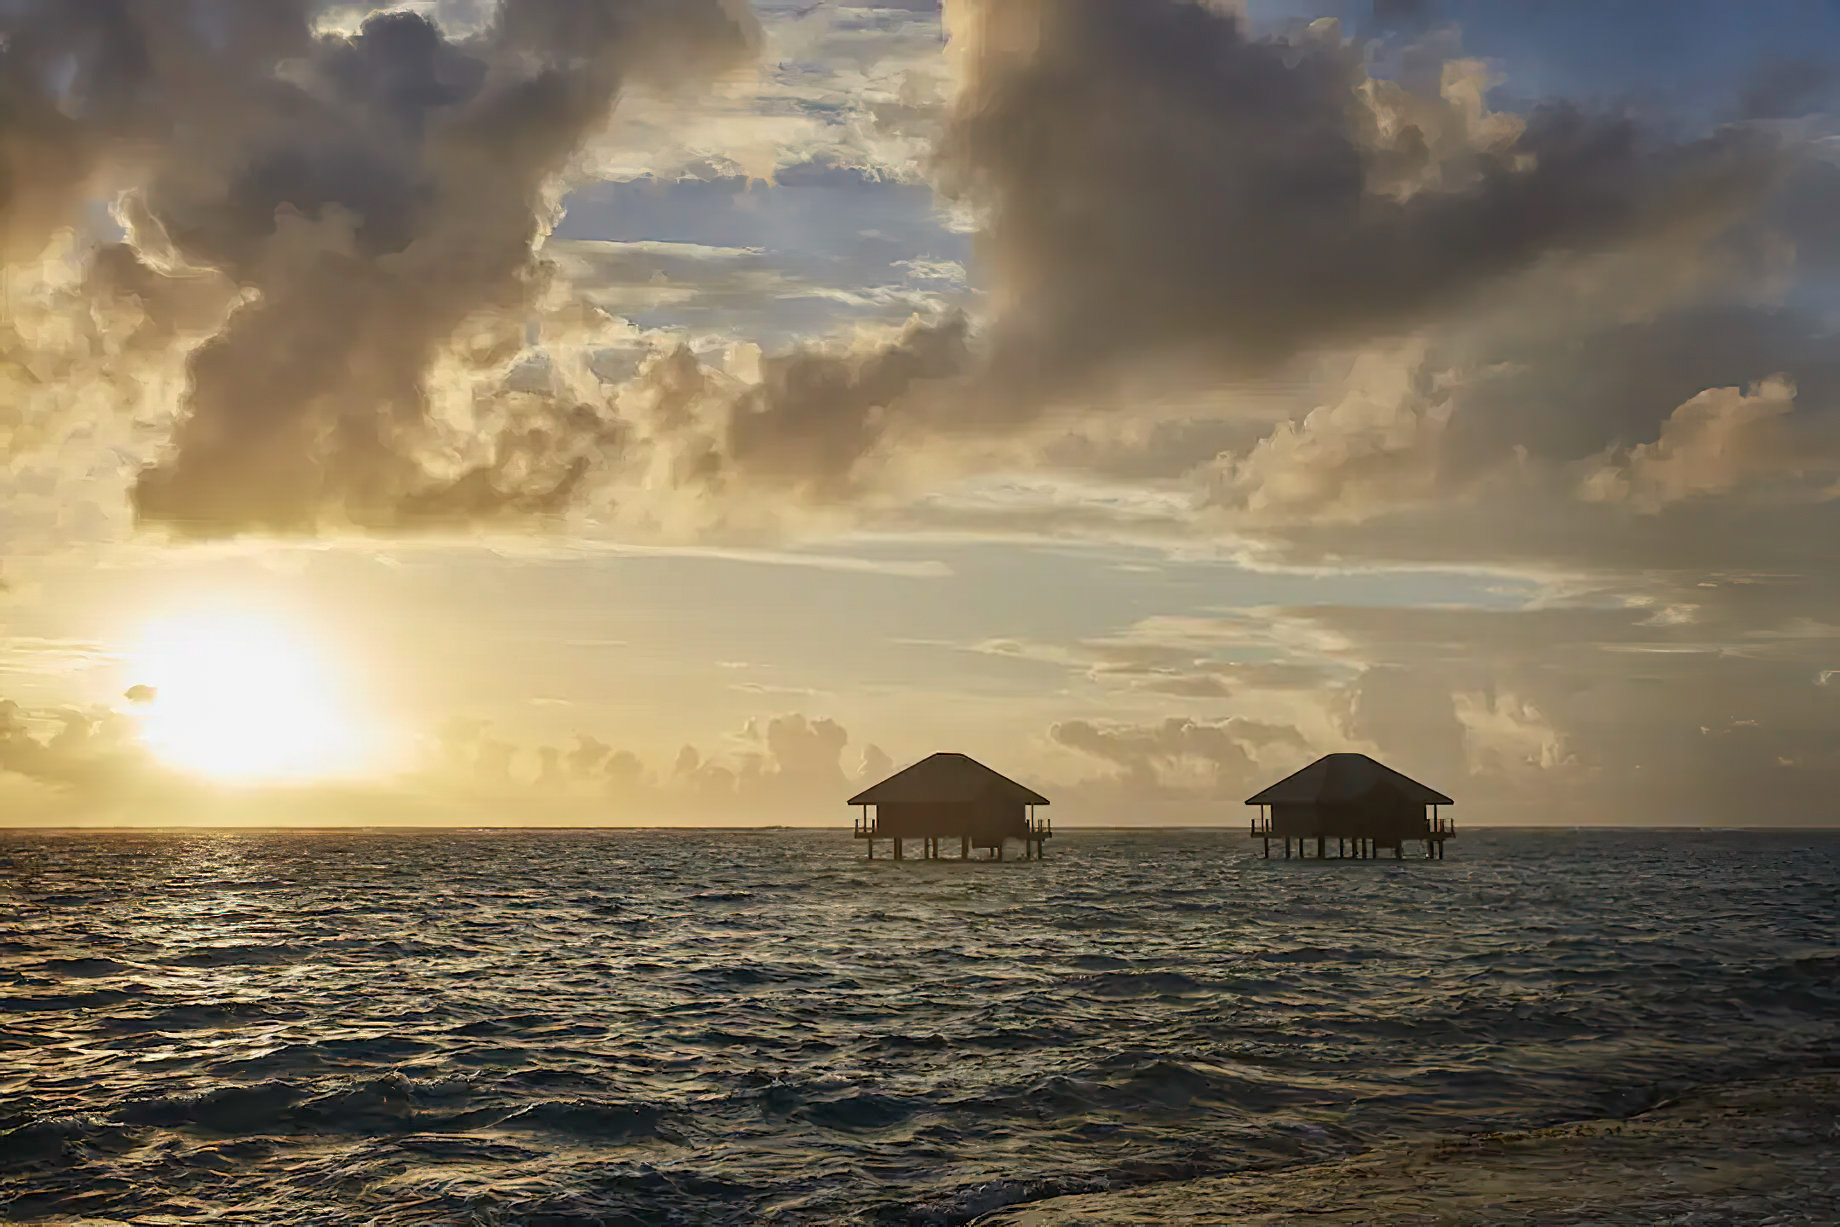 Mandarin Oriental, Canouan Island Resort – Saint Vincent and the Grenadines – Spa Overwater Bungalows Sunset View